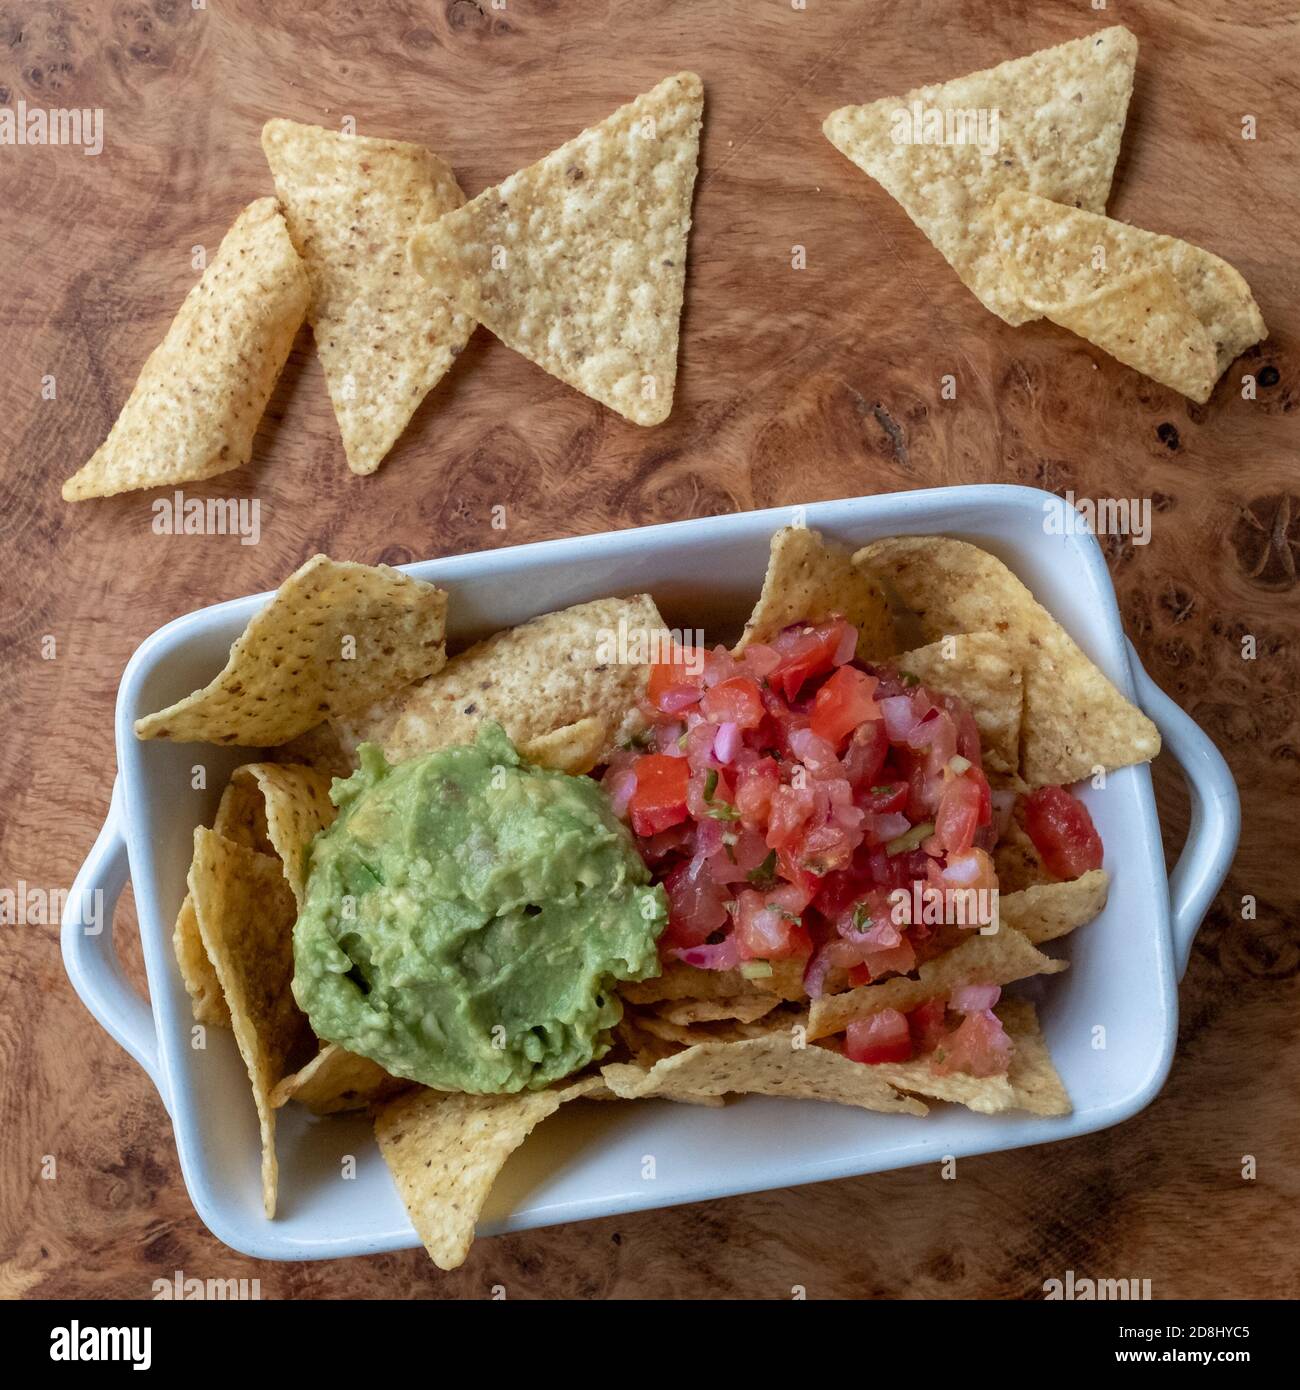 Nachos with avocado guacamole and salsa, served in a white bowl on a wooden platter. Stock Photo